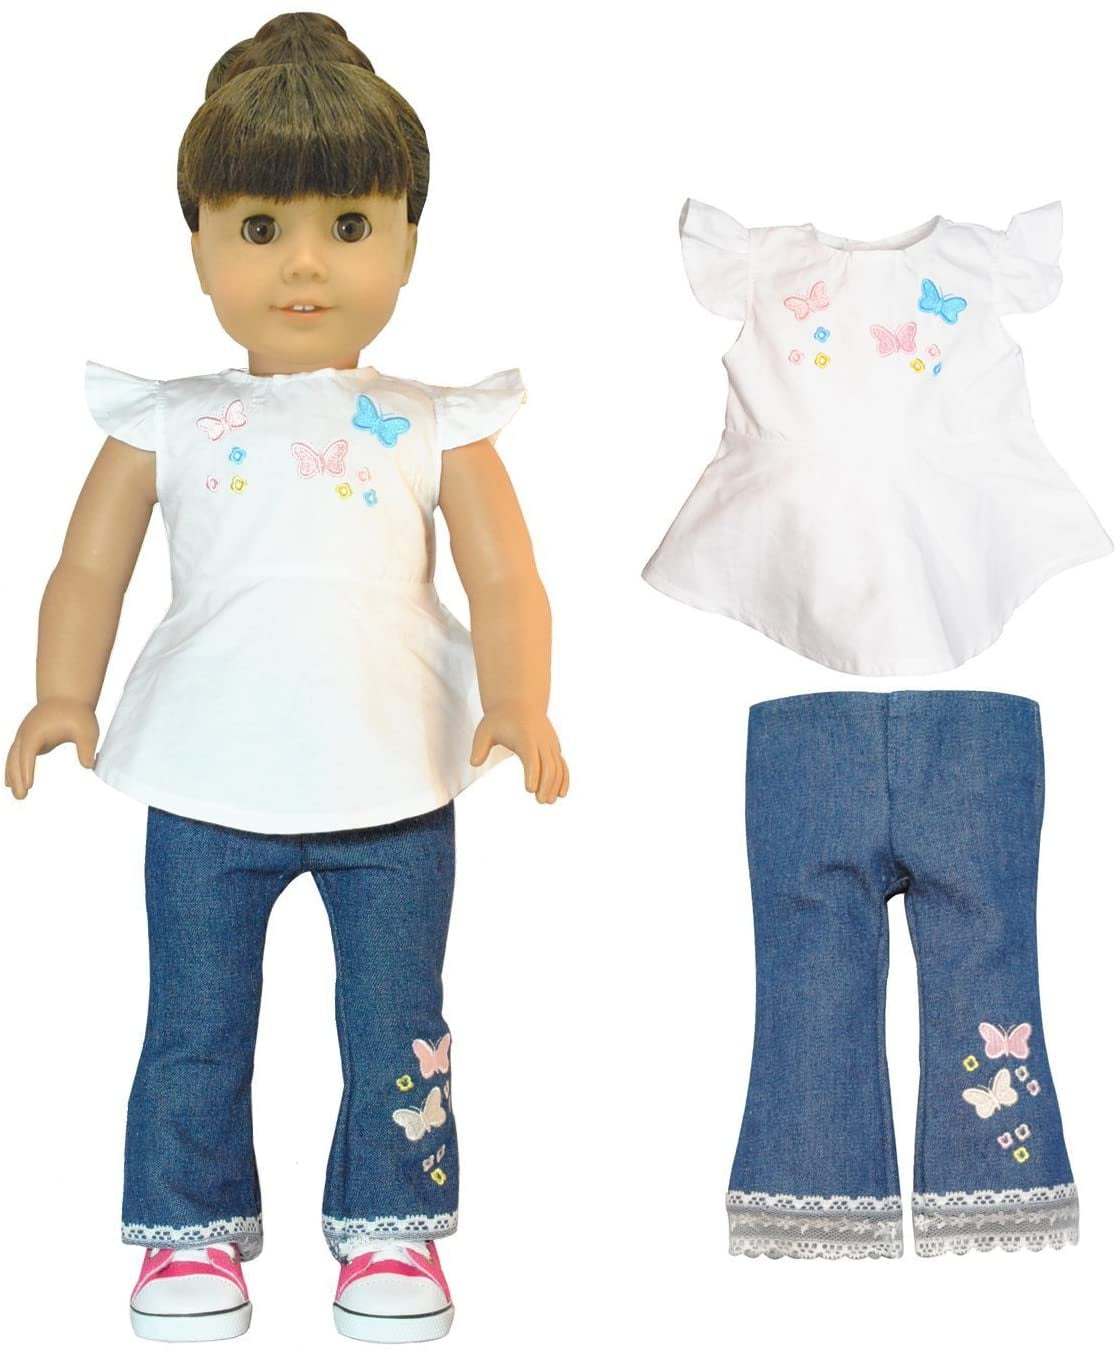 Sleeveless Pink Top/Pink Flowered Jeans for 18" Doll Clothes American Girl 